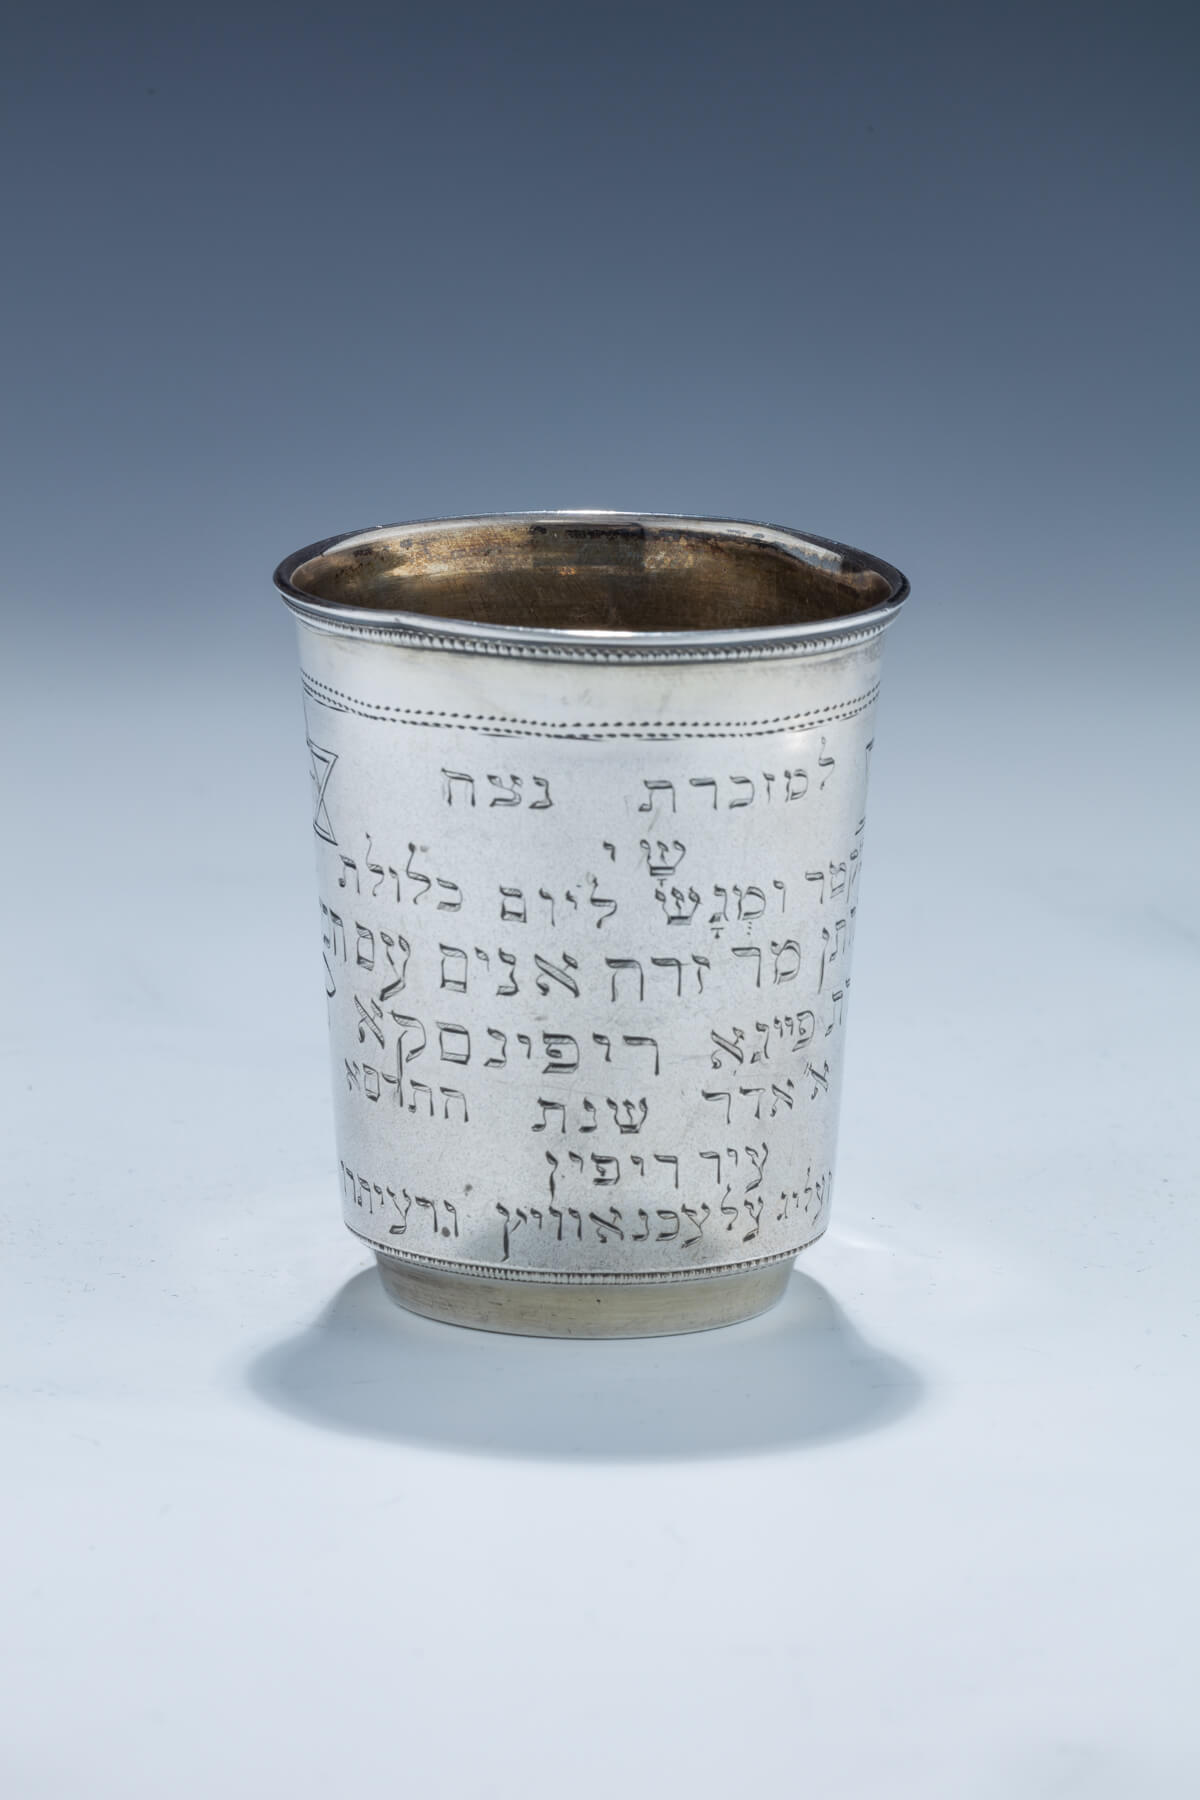 33. A Silver Kiddush Cup in Honor of a Wedding